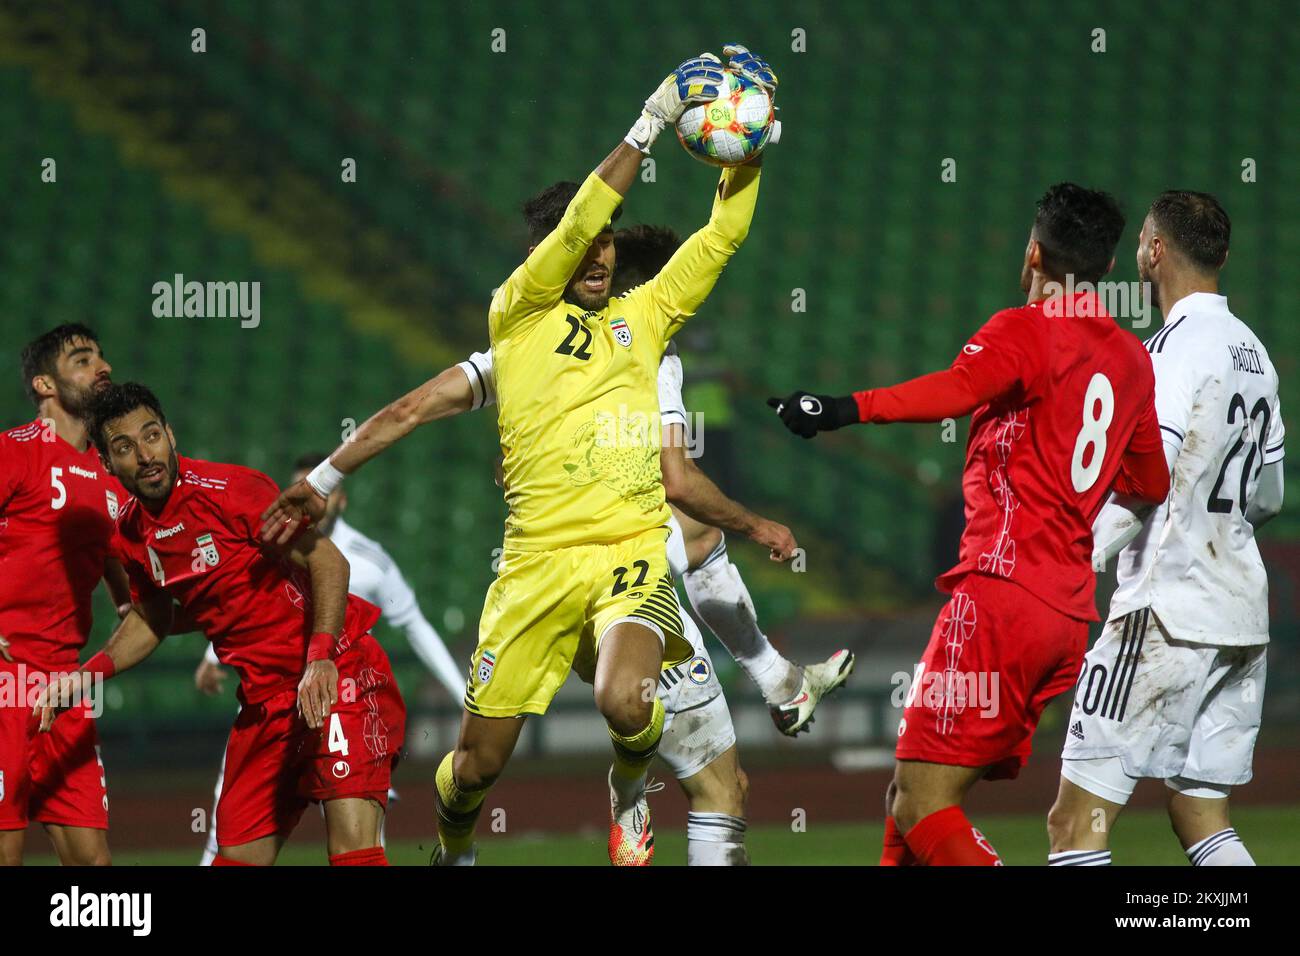 Goalkeeper Amir Abedzadeh with ball during friendly match between Bosnia and Herzegovina and Iran, in Sarajevo,Bosnia and Herzegovina , November 12, 2020. Photo: Armin Durgut/PIXSELL  Stock Photo